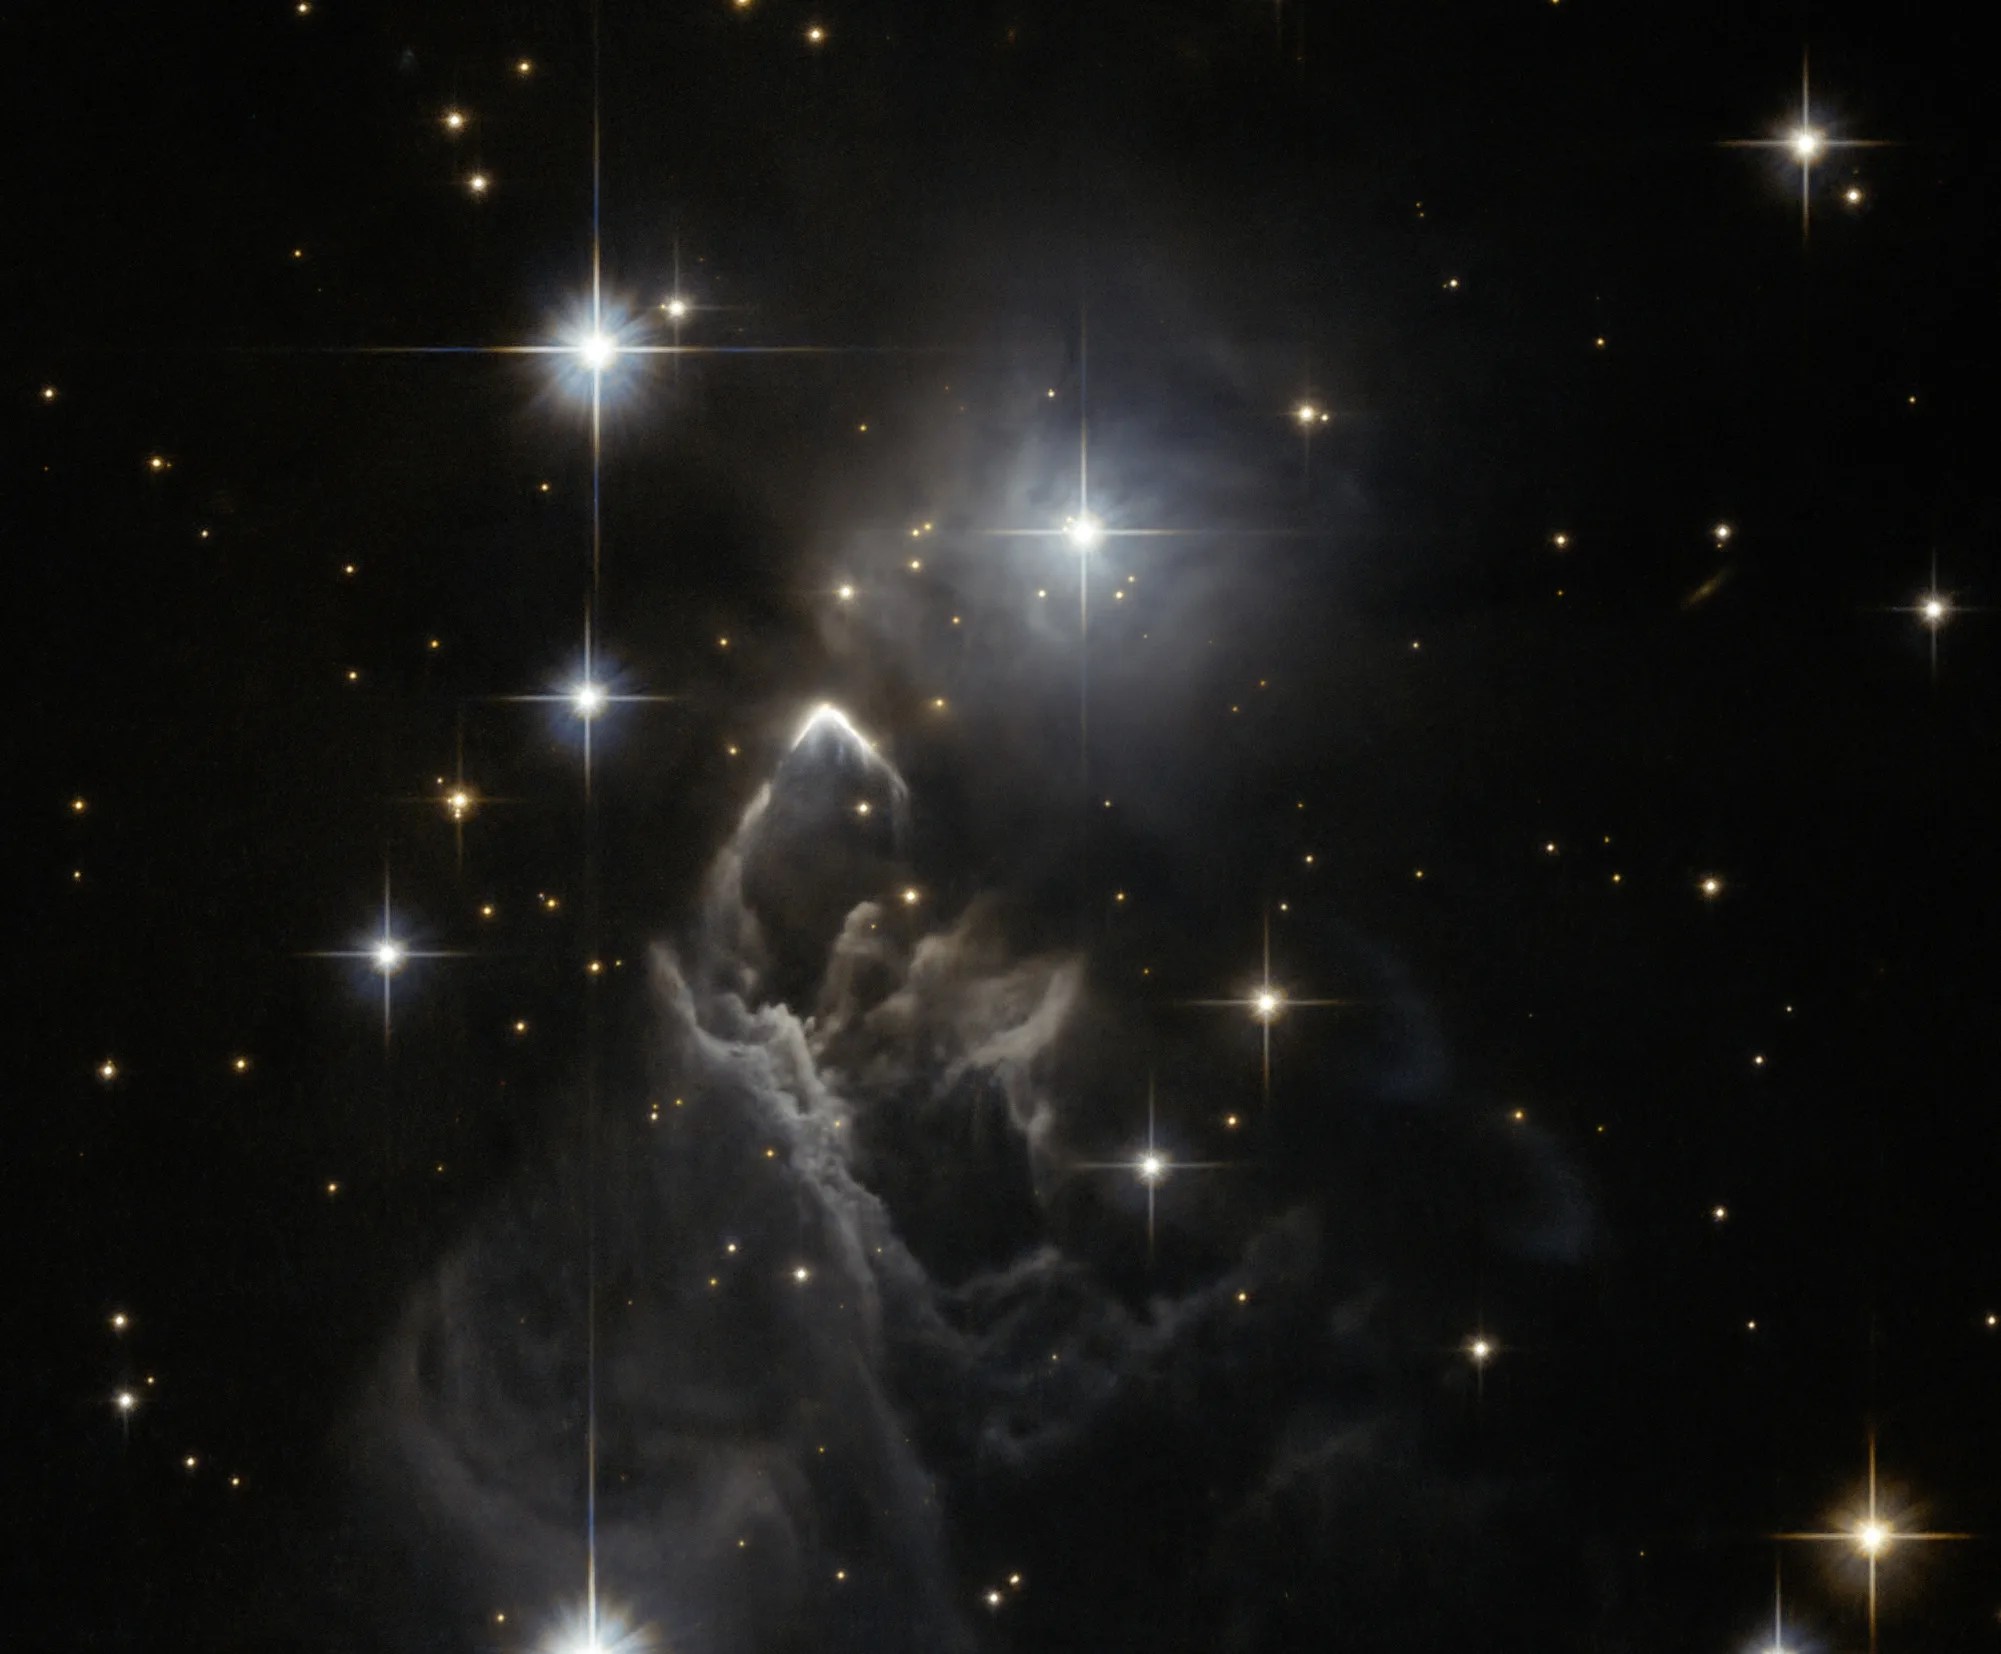 Bright stars and shadowy clouds of dust